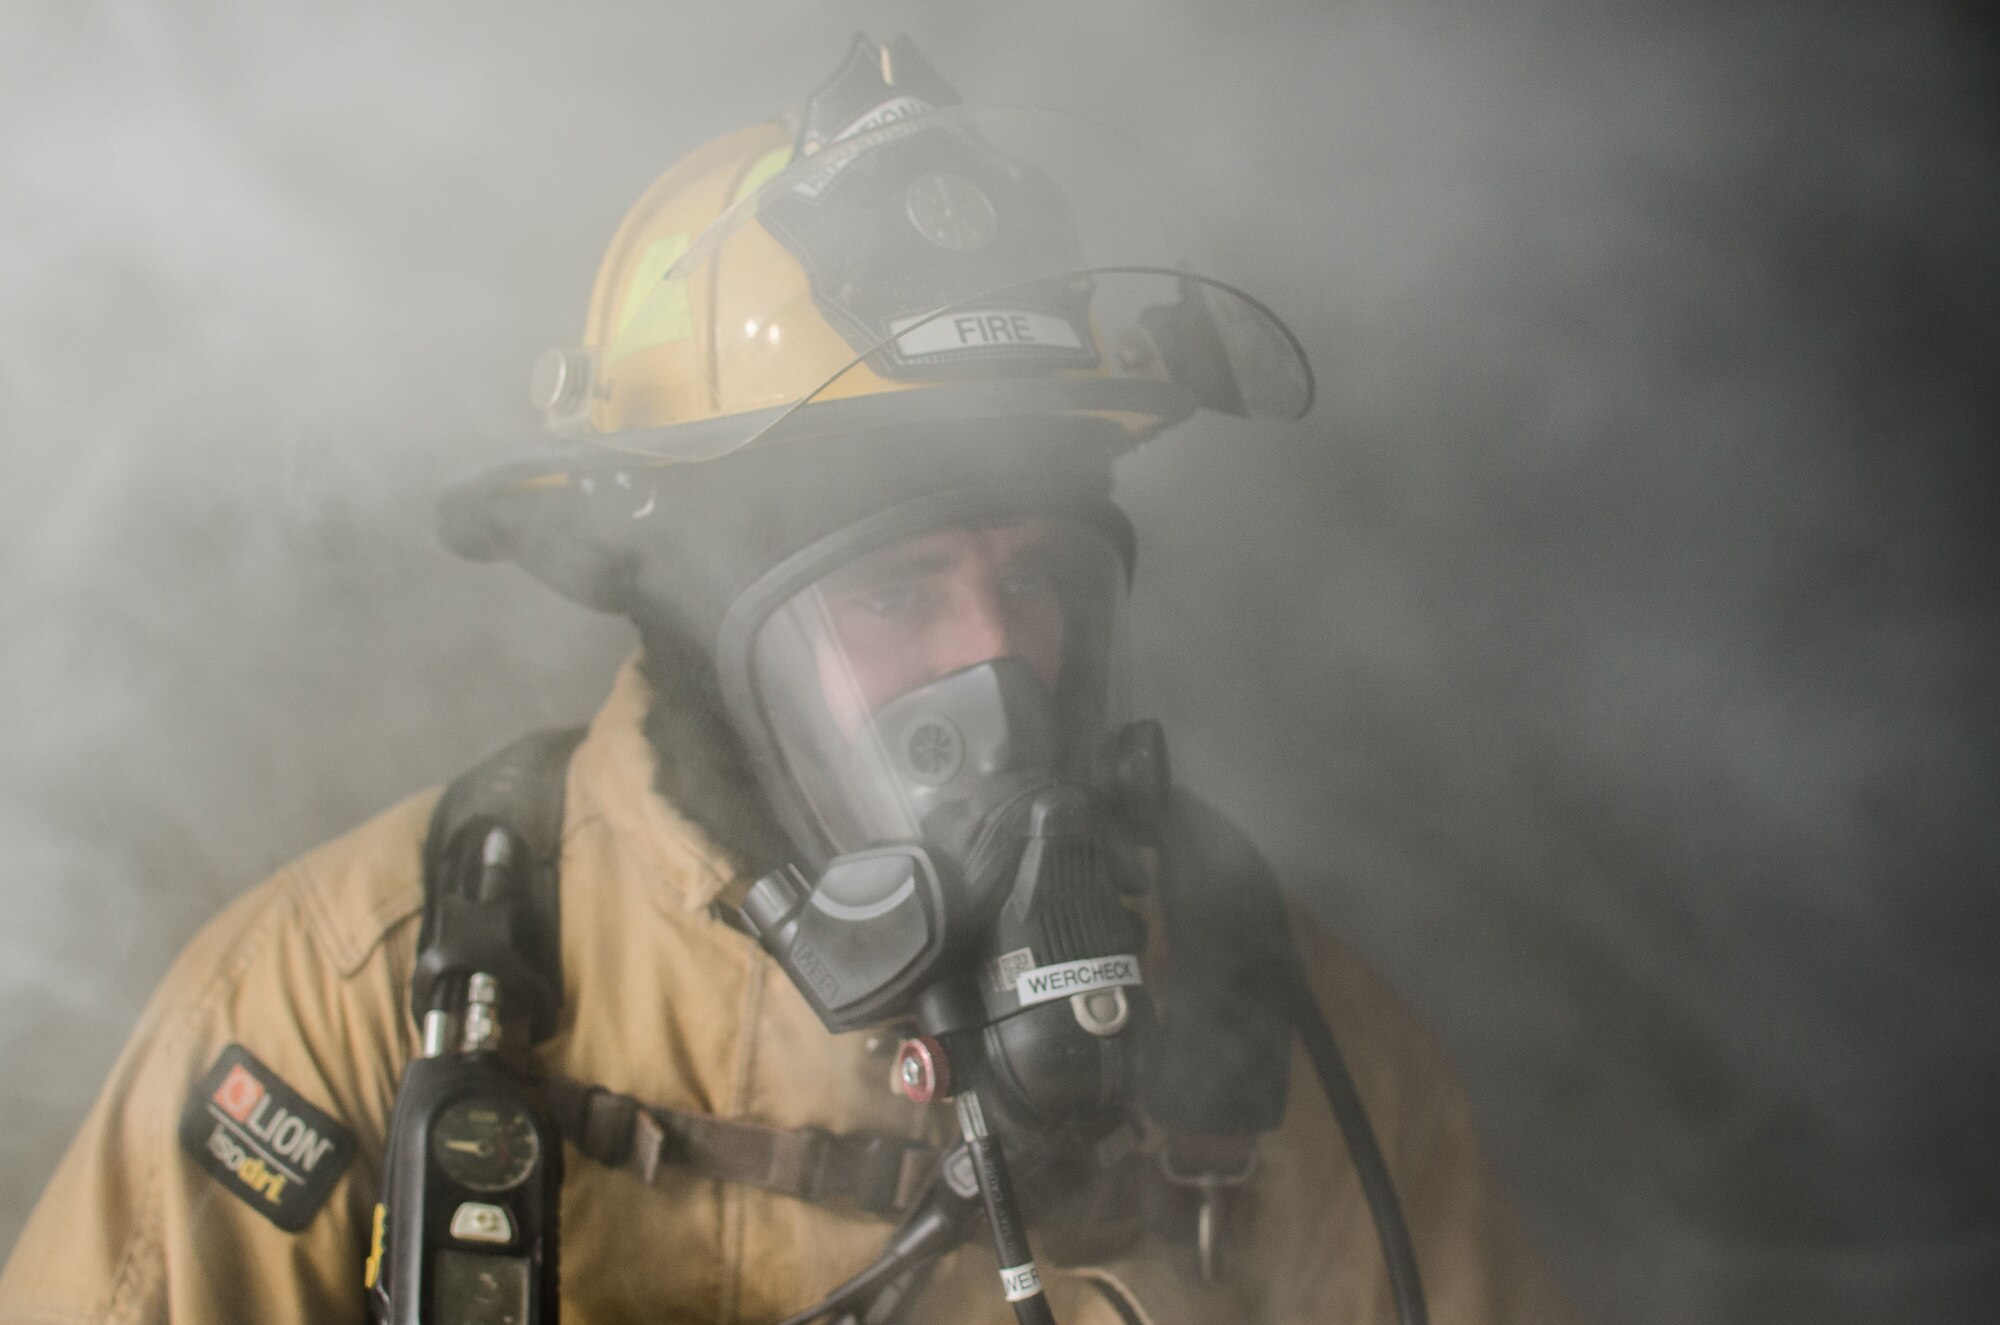 U.S. Air Force Senior Airman Steven Werchek, 380th Expeditionary Civil Engineer Squadron firefighter, observes as his wingman extinguishes a simulated fire at Al Dhafra Air Base, United Arab Emirates, Jan. 12, 2018. The firefighters utilized the “two-in, two-out” policy that mandates that firefighters never enter a building alone during a rescue mission. (U.S. Air National Guard photo by Staff Sgt. Colton Elliott)